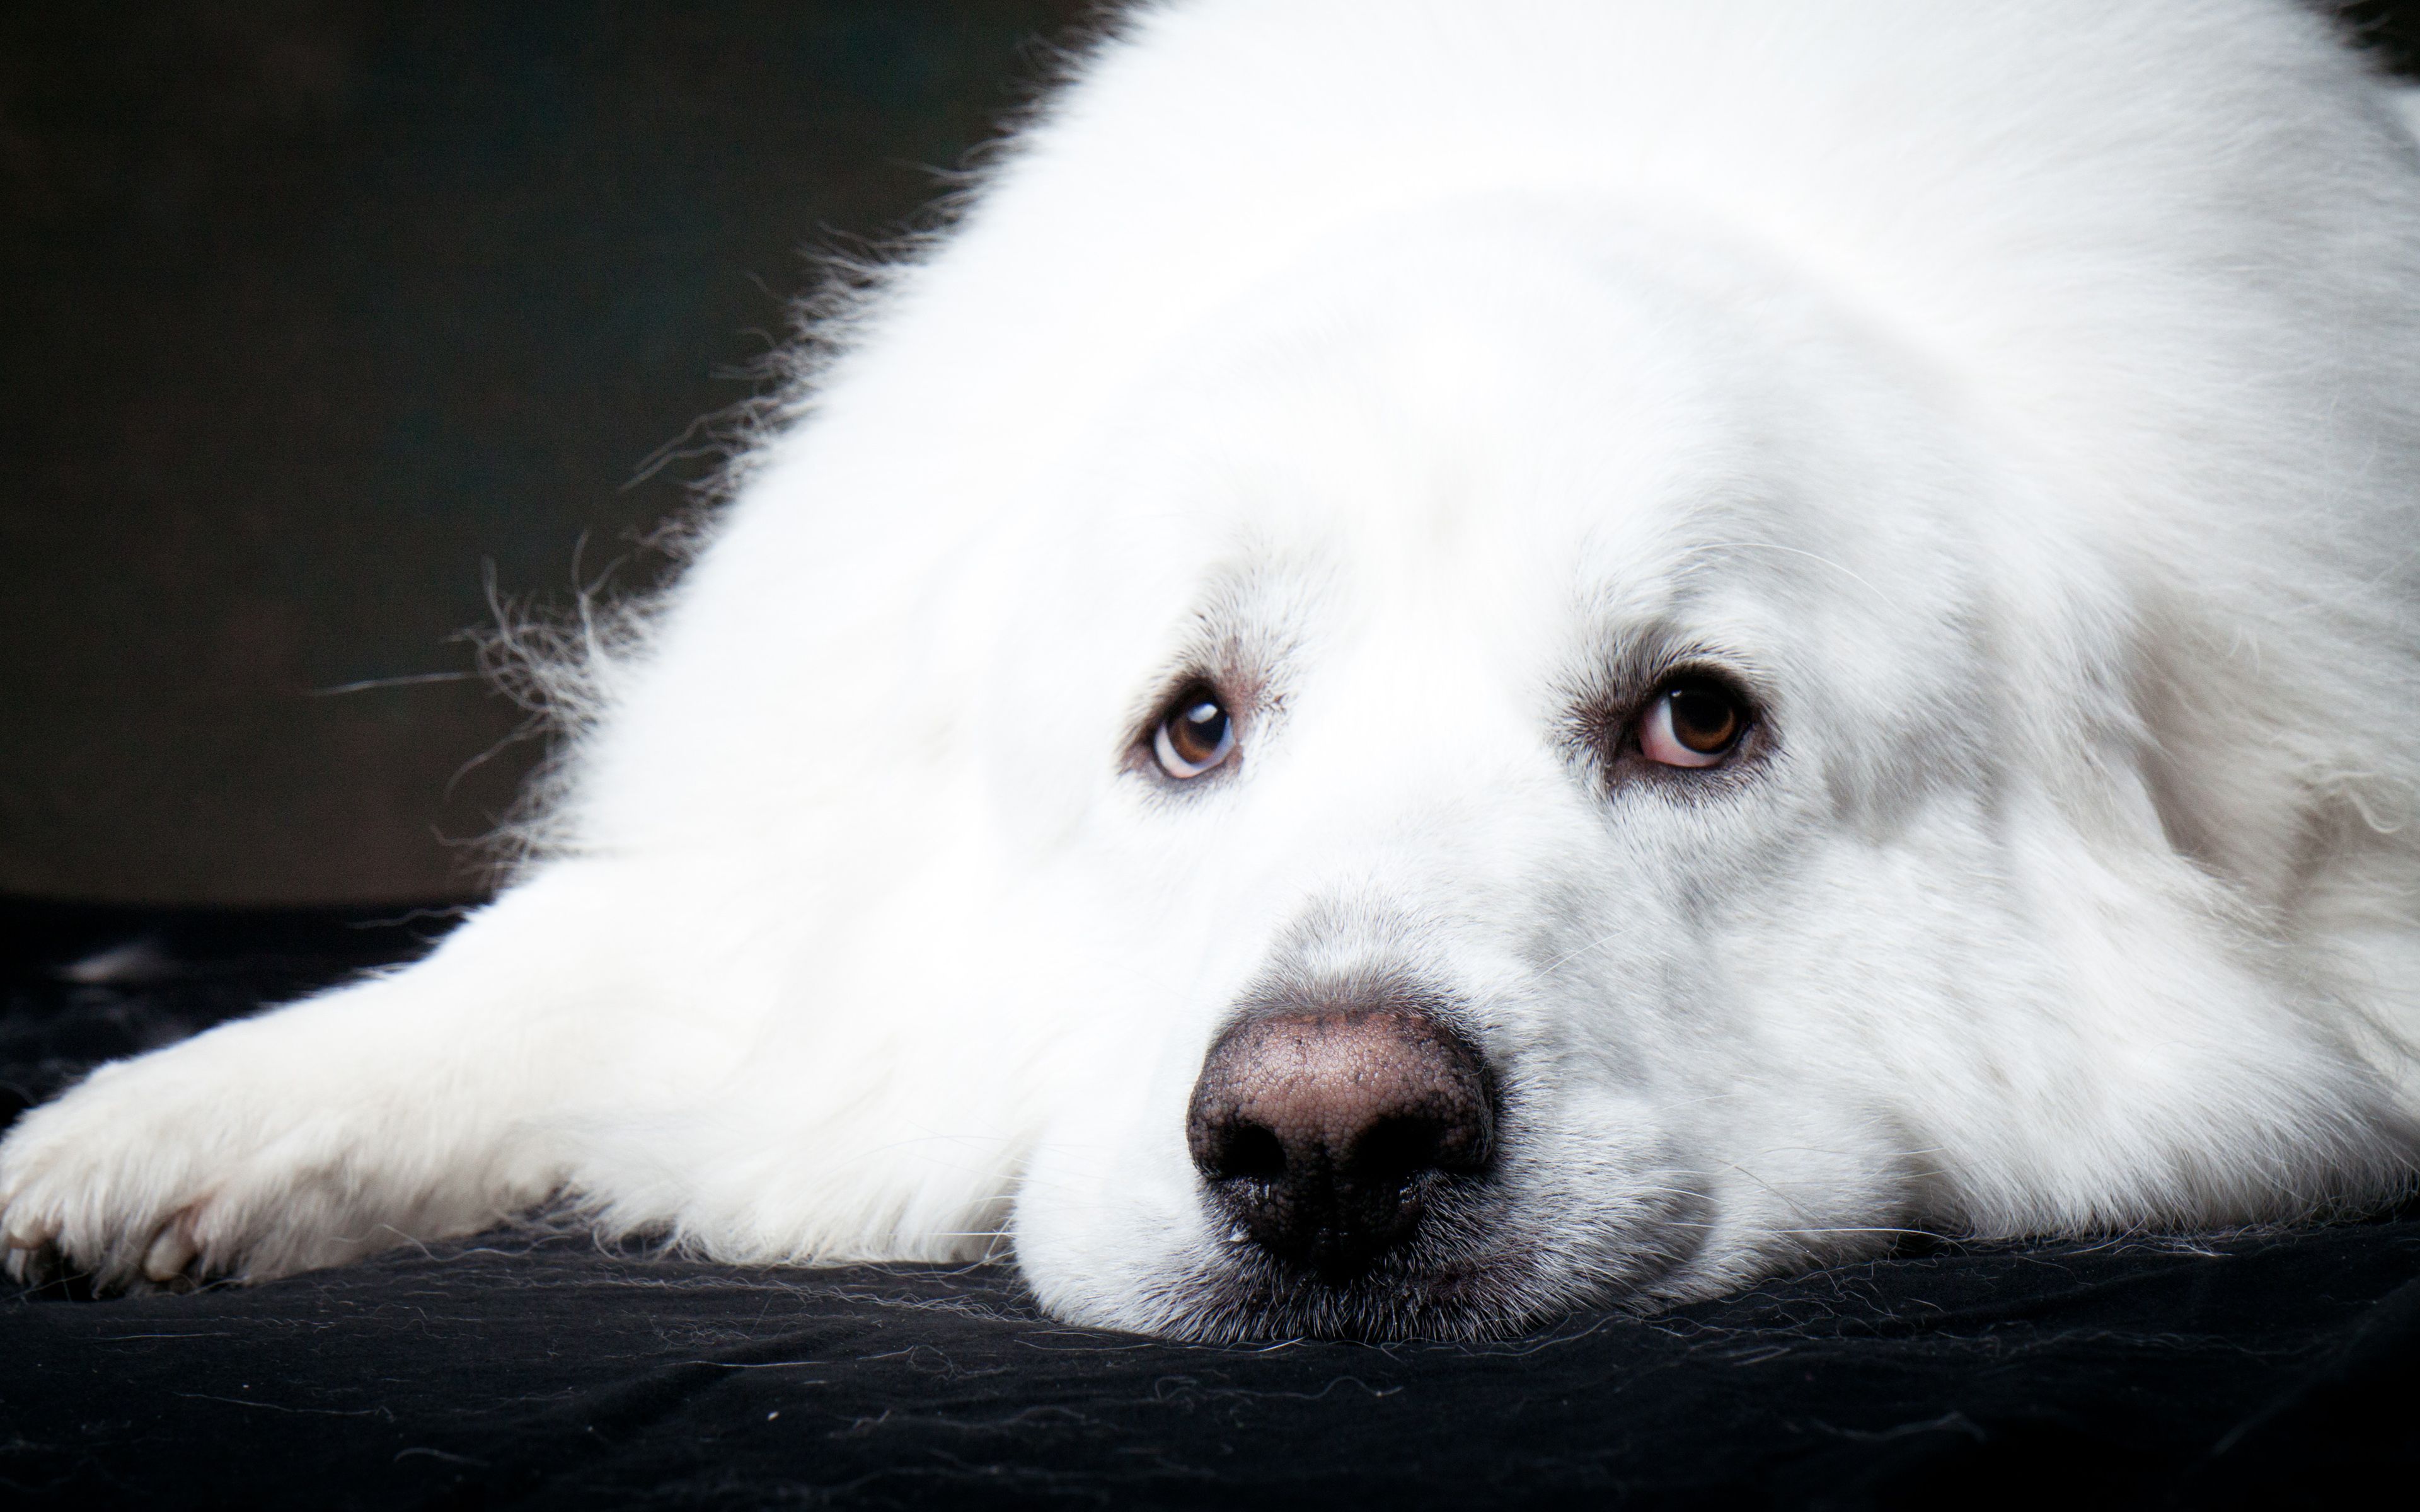 Download wallpaper 4k, Great Pyrenees, dogs, pets, cute animals, muzzle, Great Pyrenees Dog for desktop with resolution 3840x2400. High Quality HD picture wallpaper